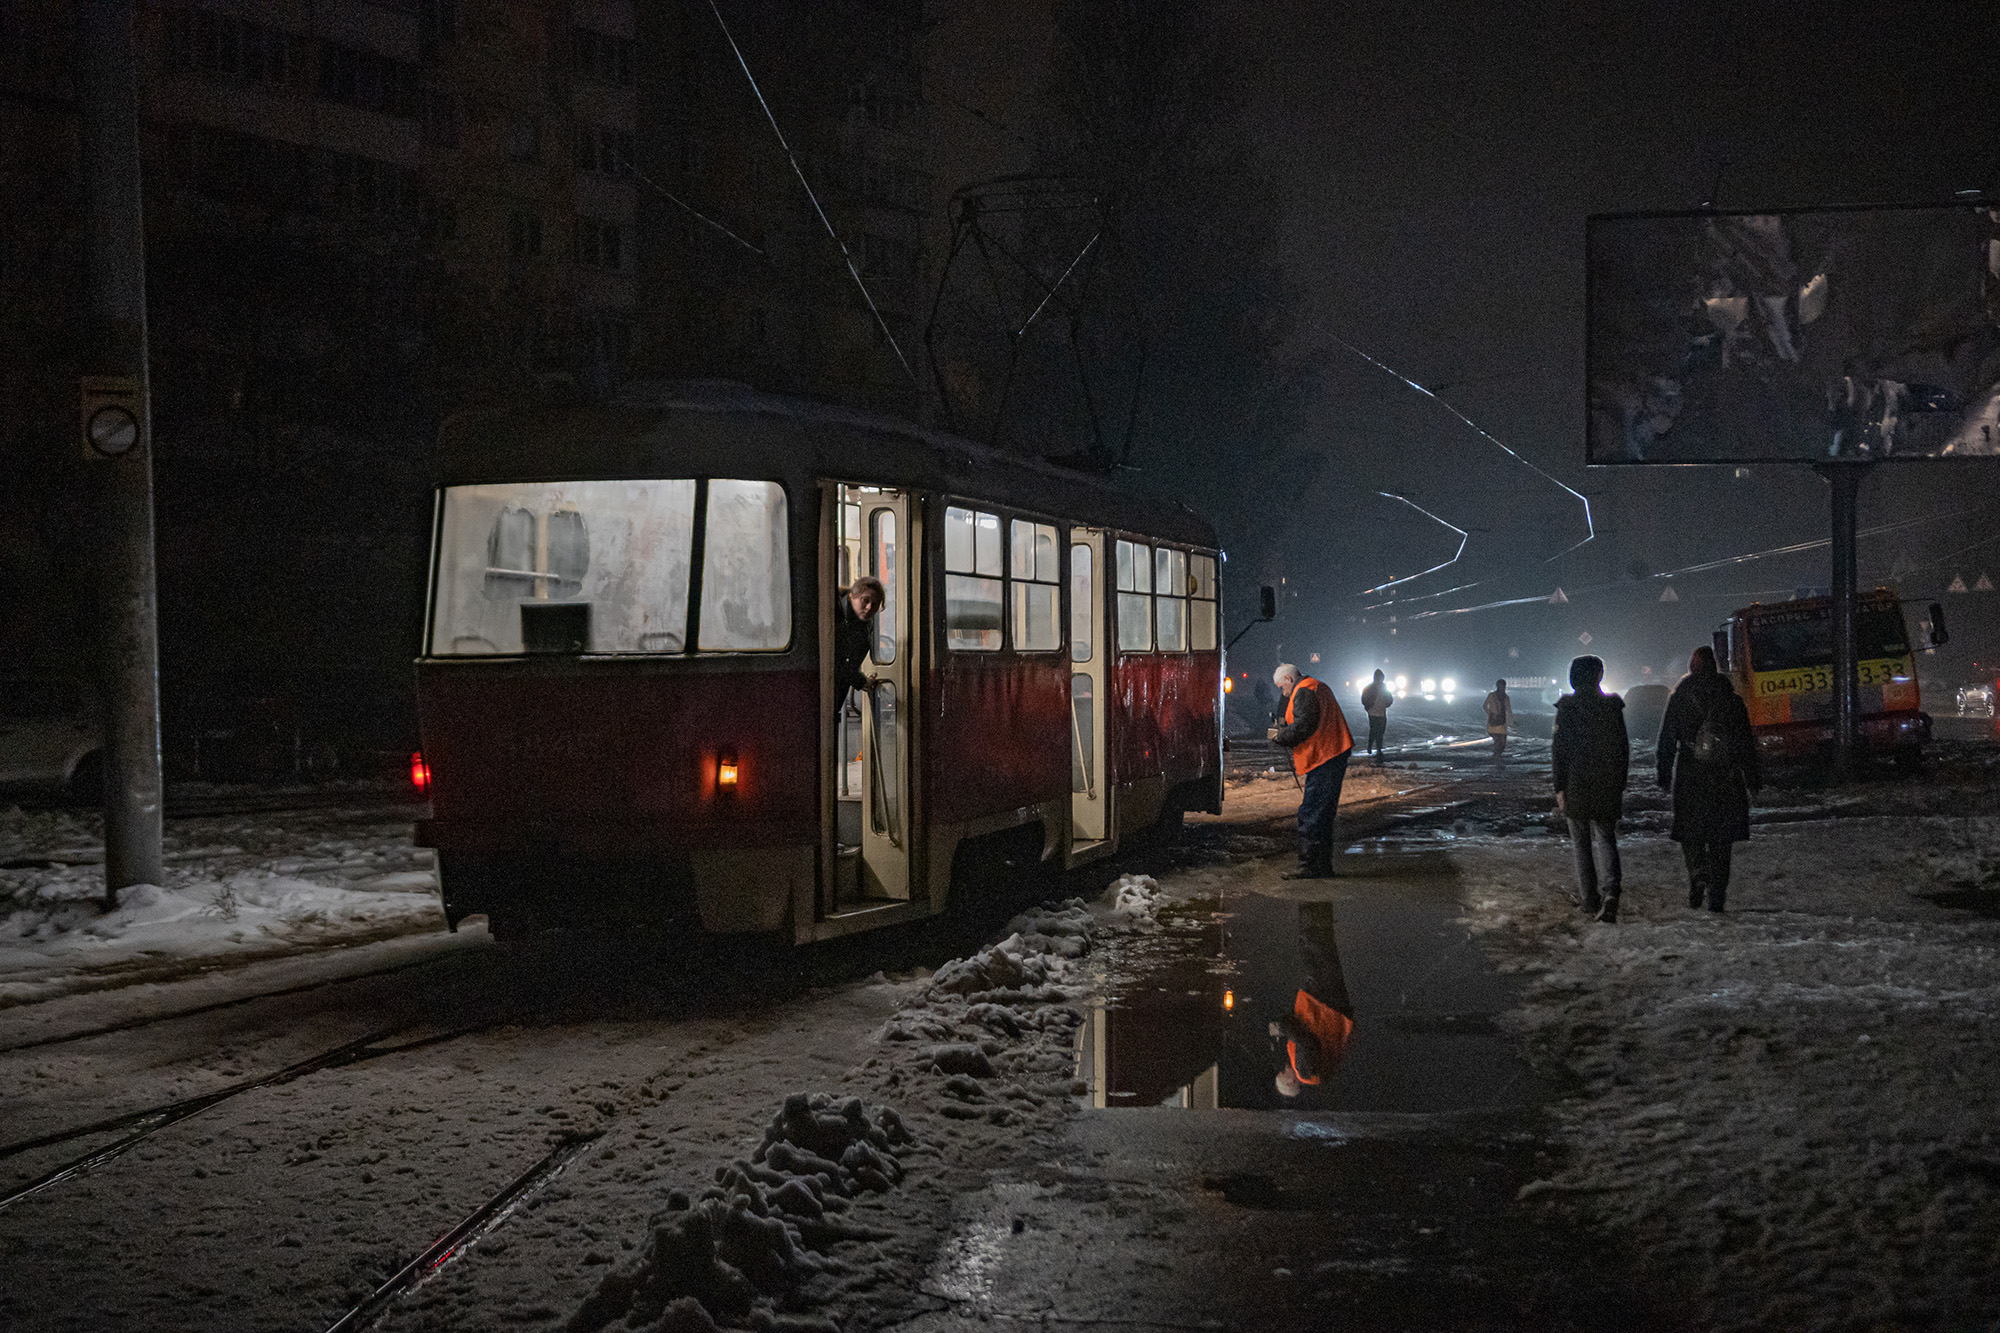 Power outages have led to blackouts in Kyiv, Ukraine, on November 24.